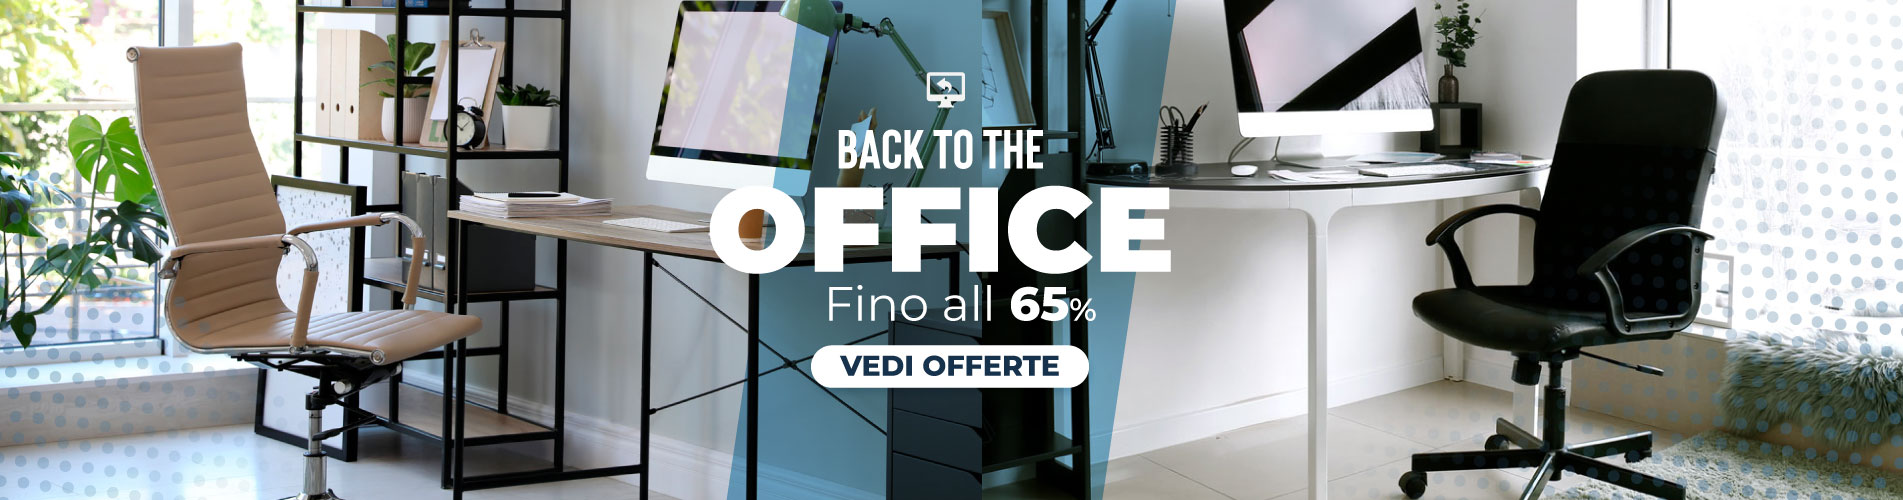 Promozione Back to the Office